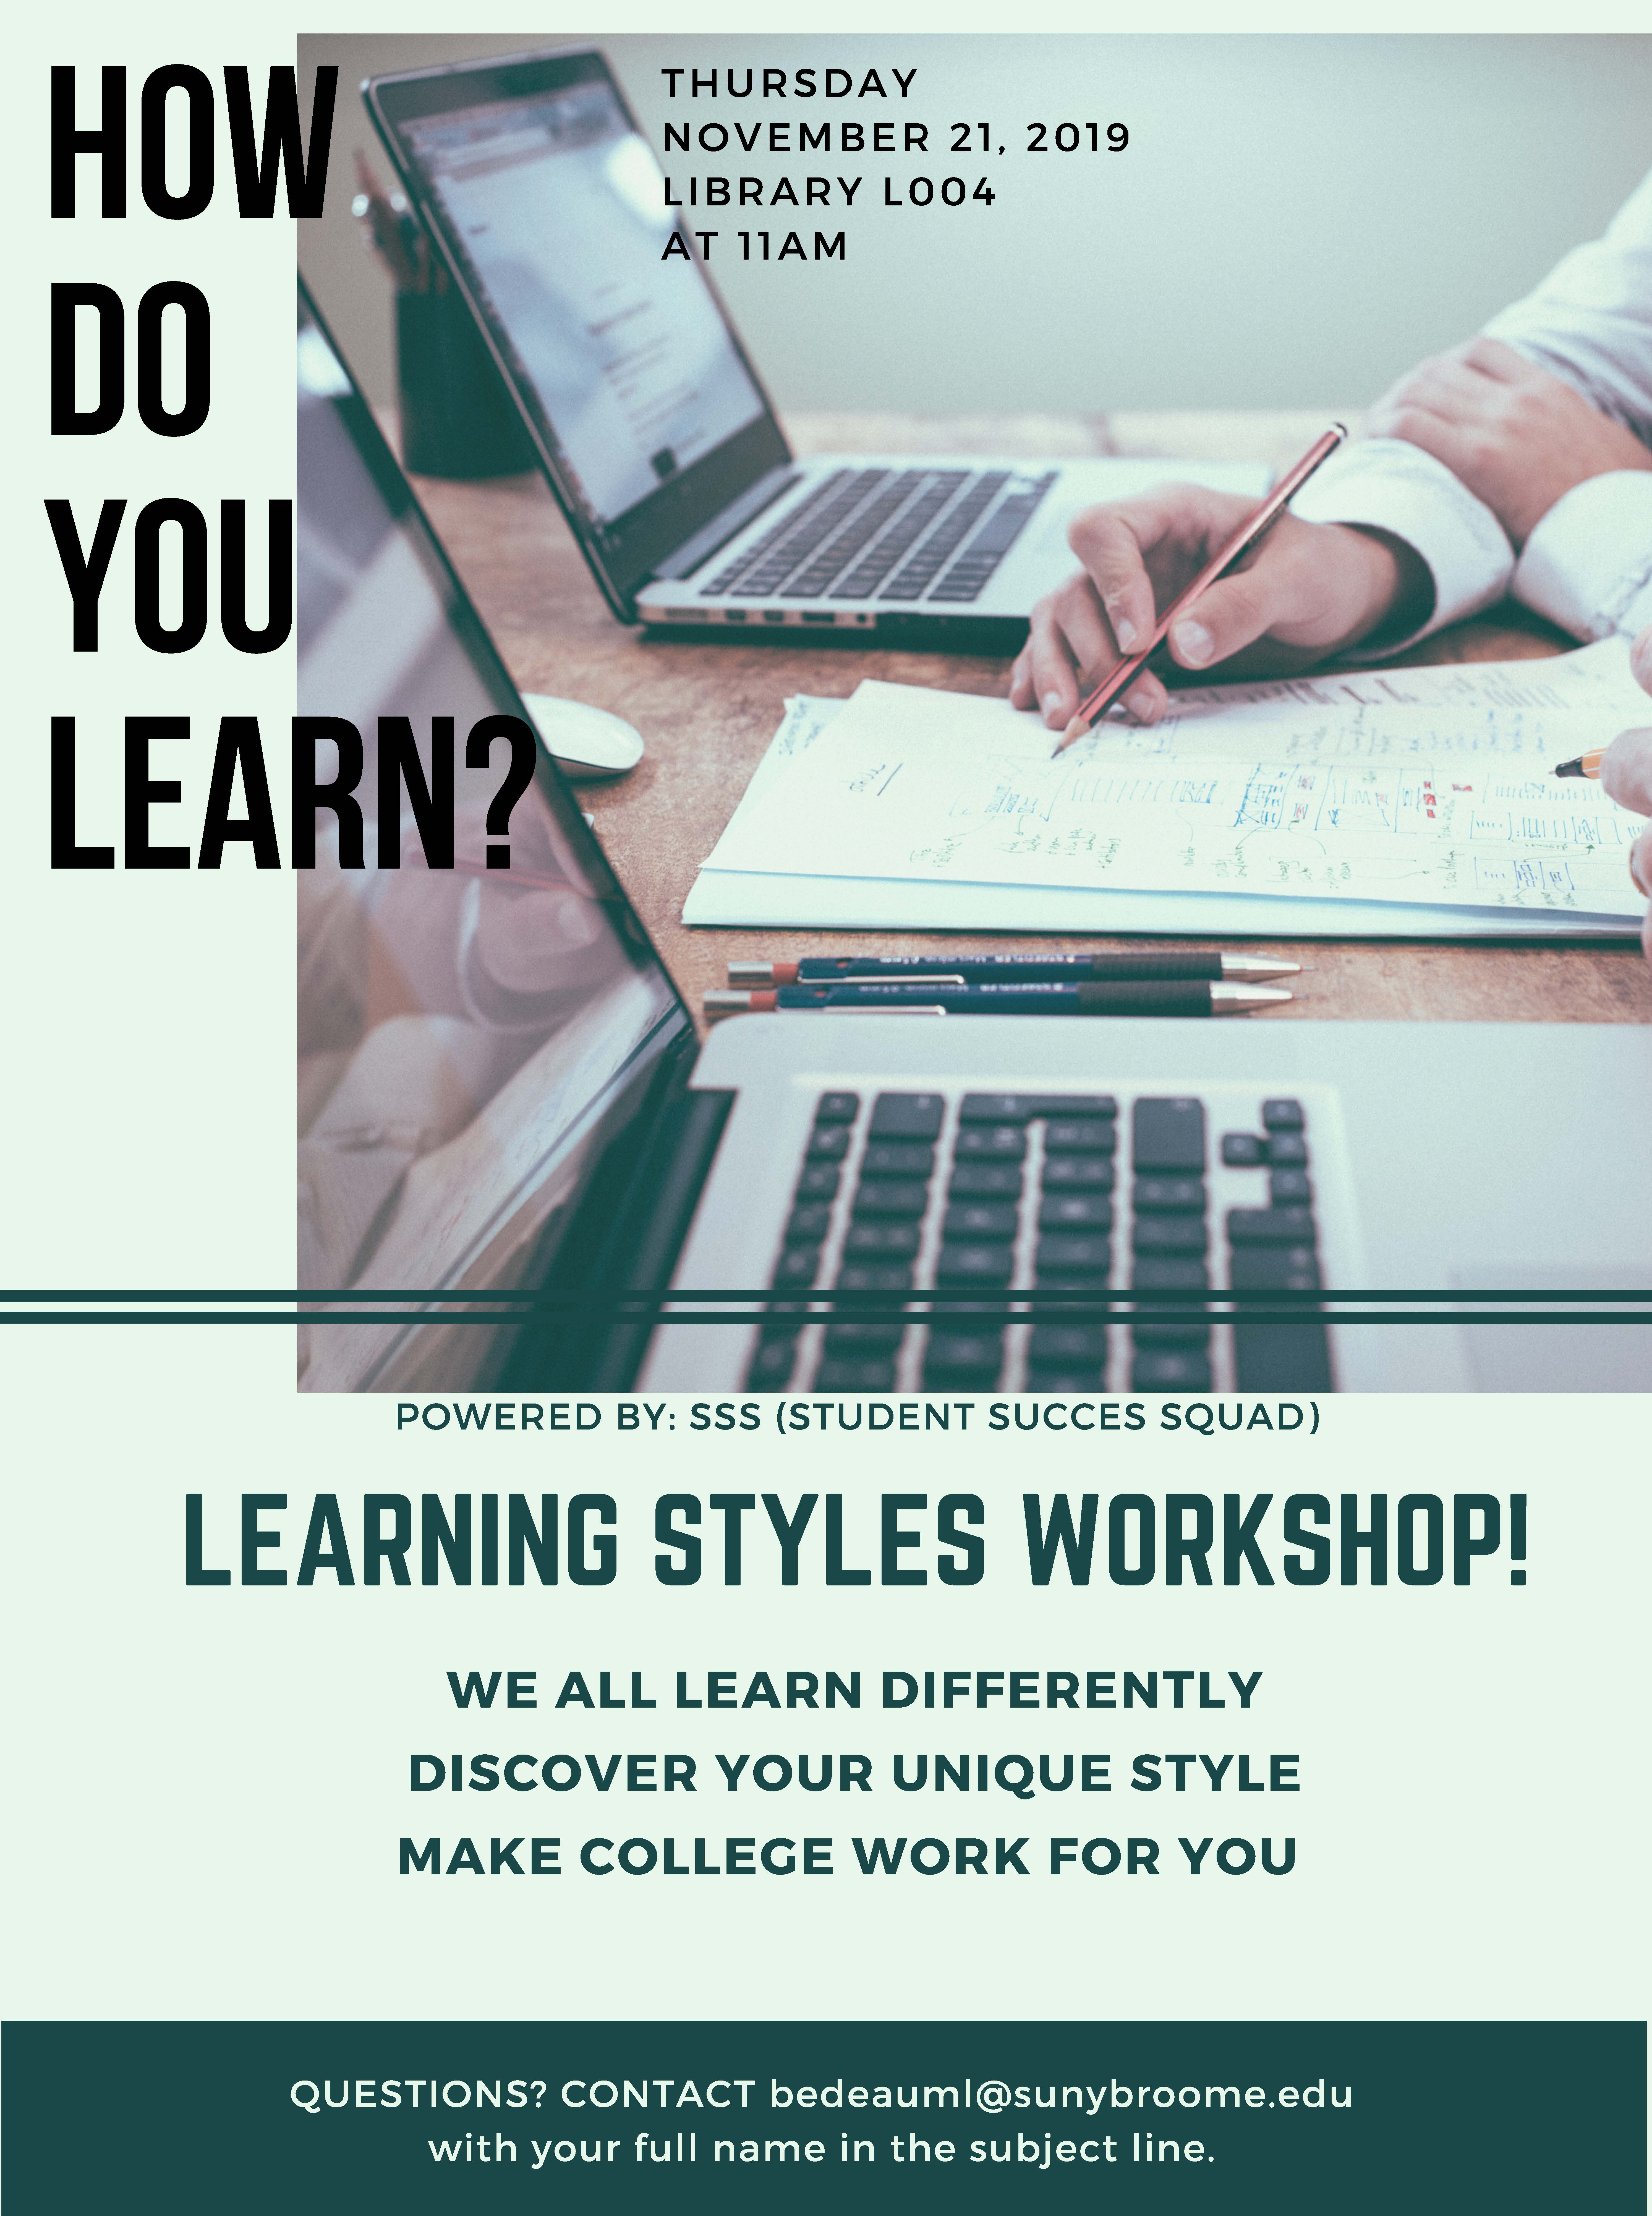 How do you learn? Join the Student Success Squad for a Learning Styles Workshop at 11 a.m. Thursday, Nov. 21, in Library L004.